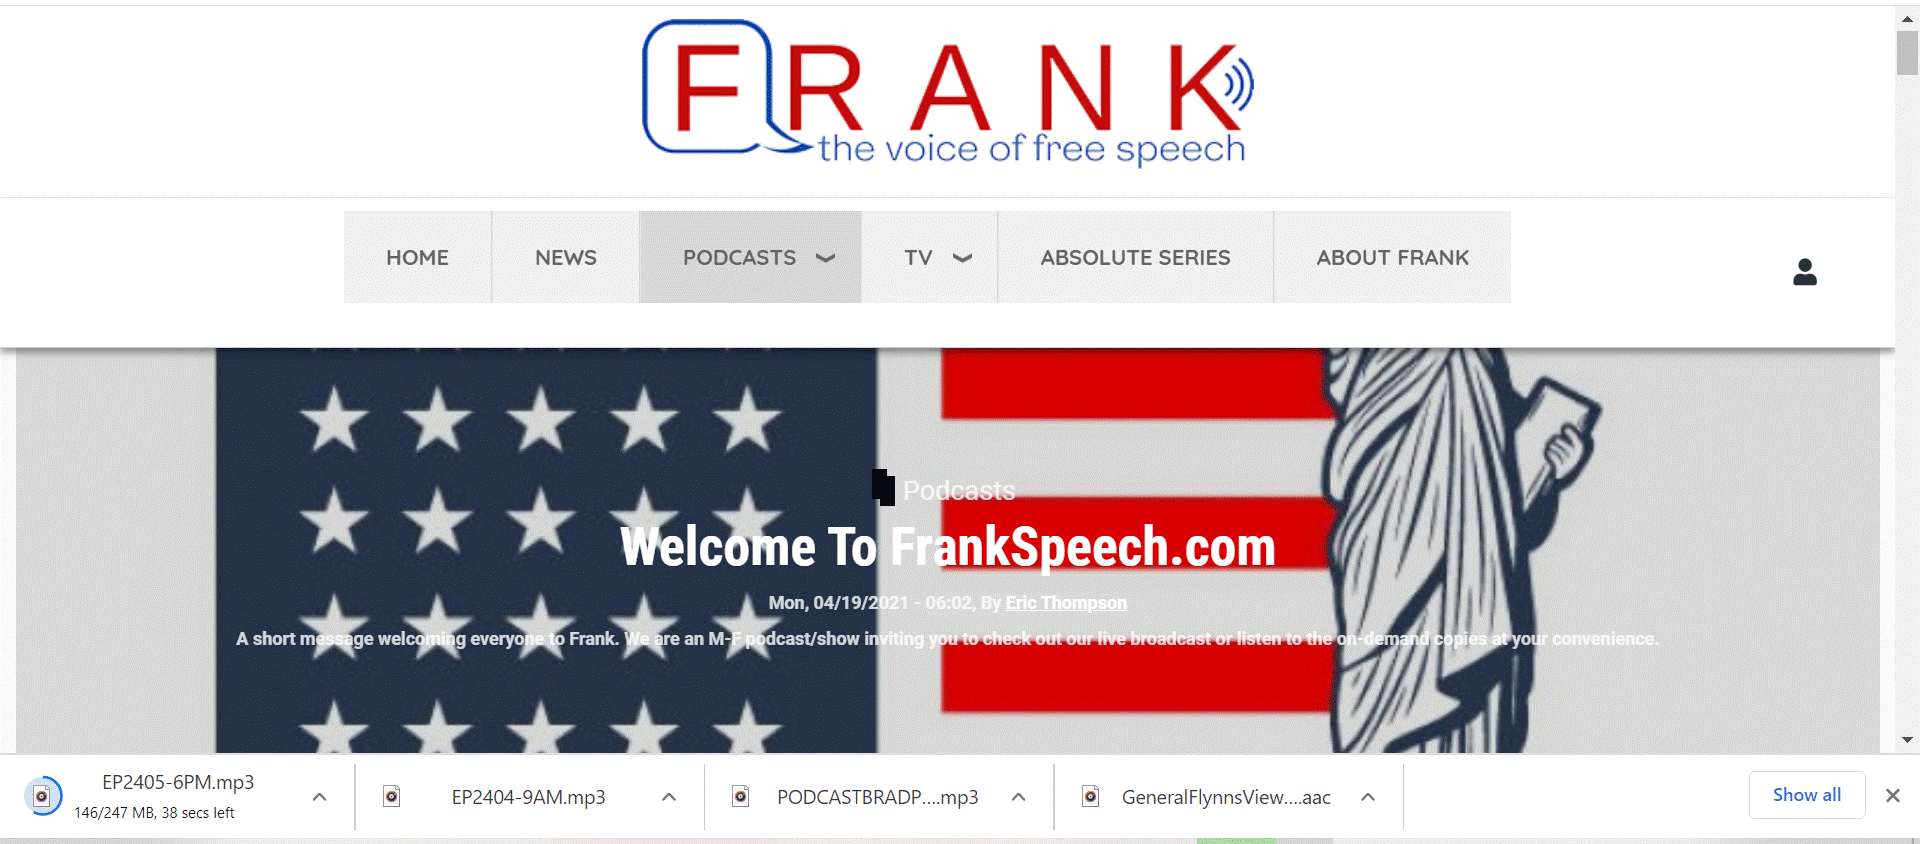 Frank Speech Updates and More